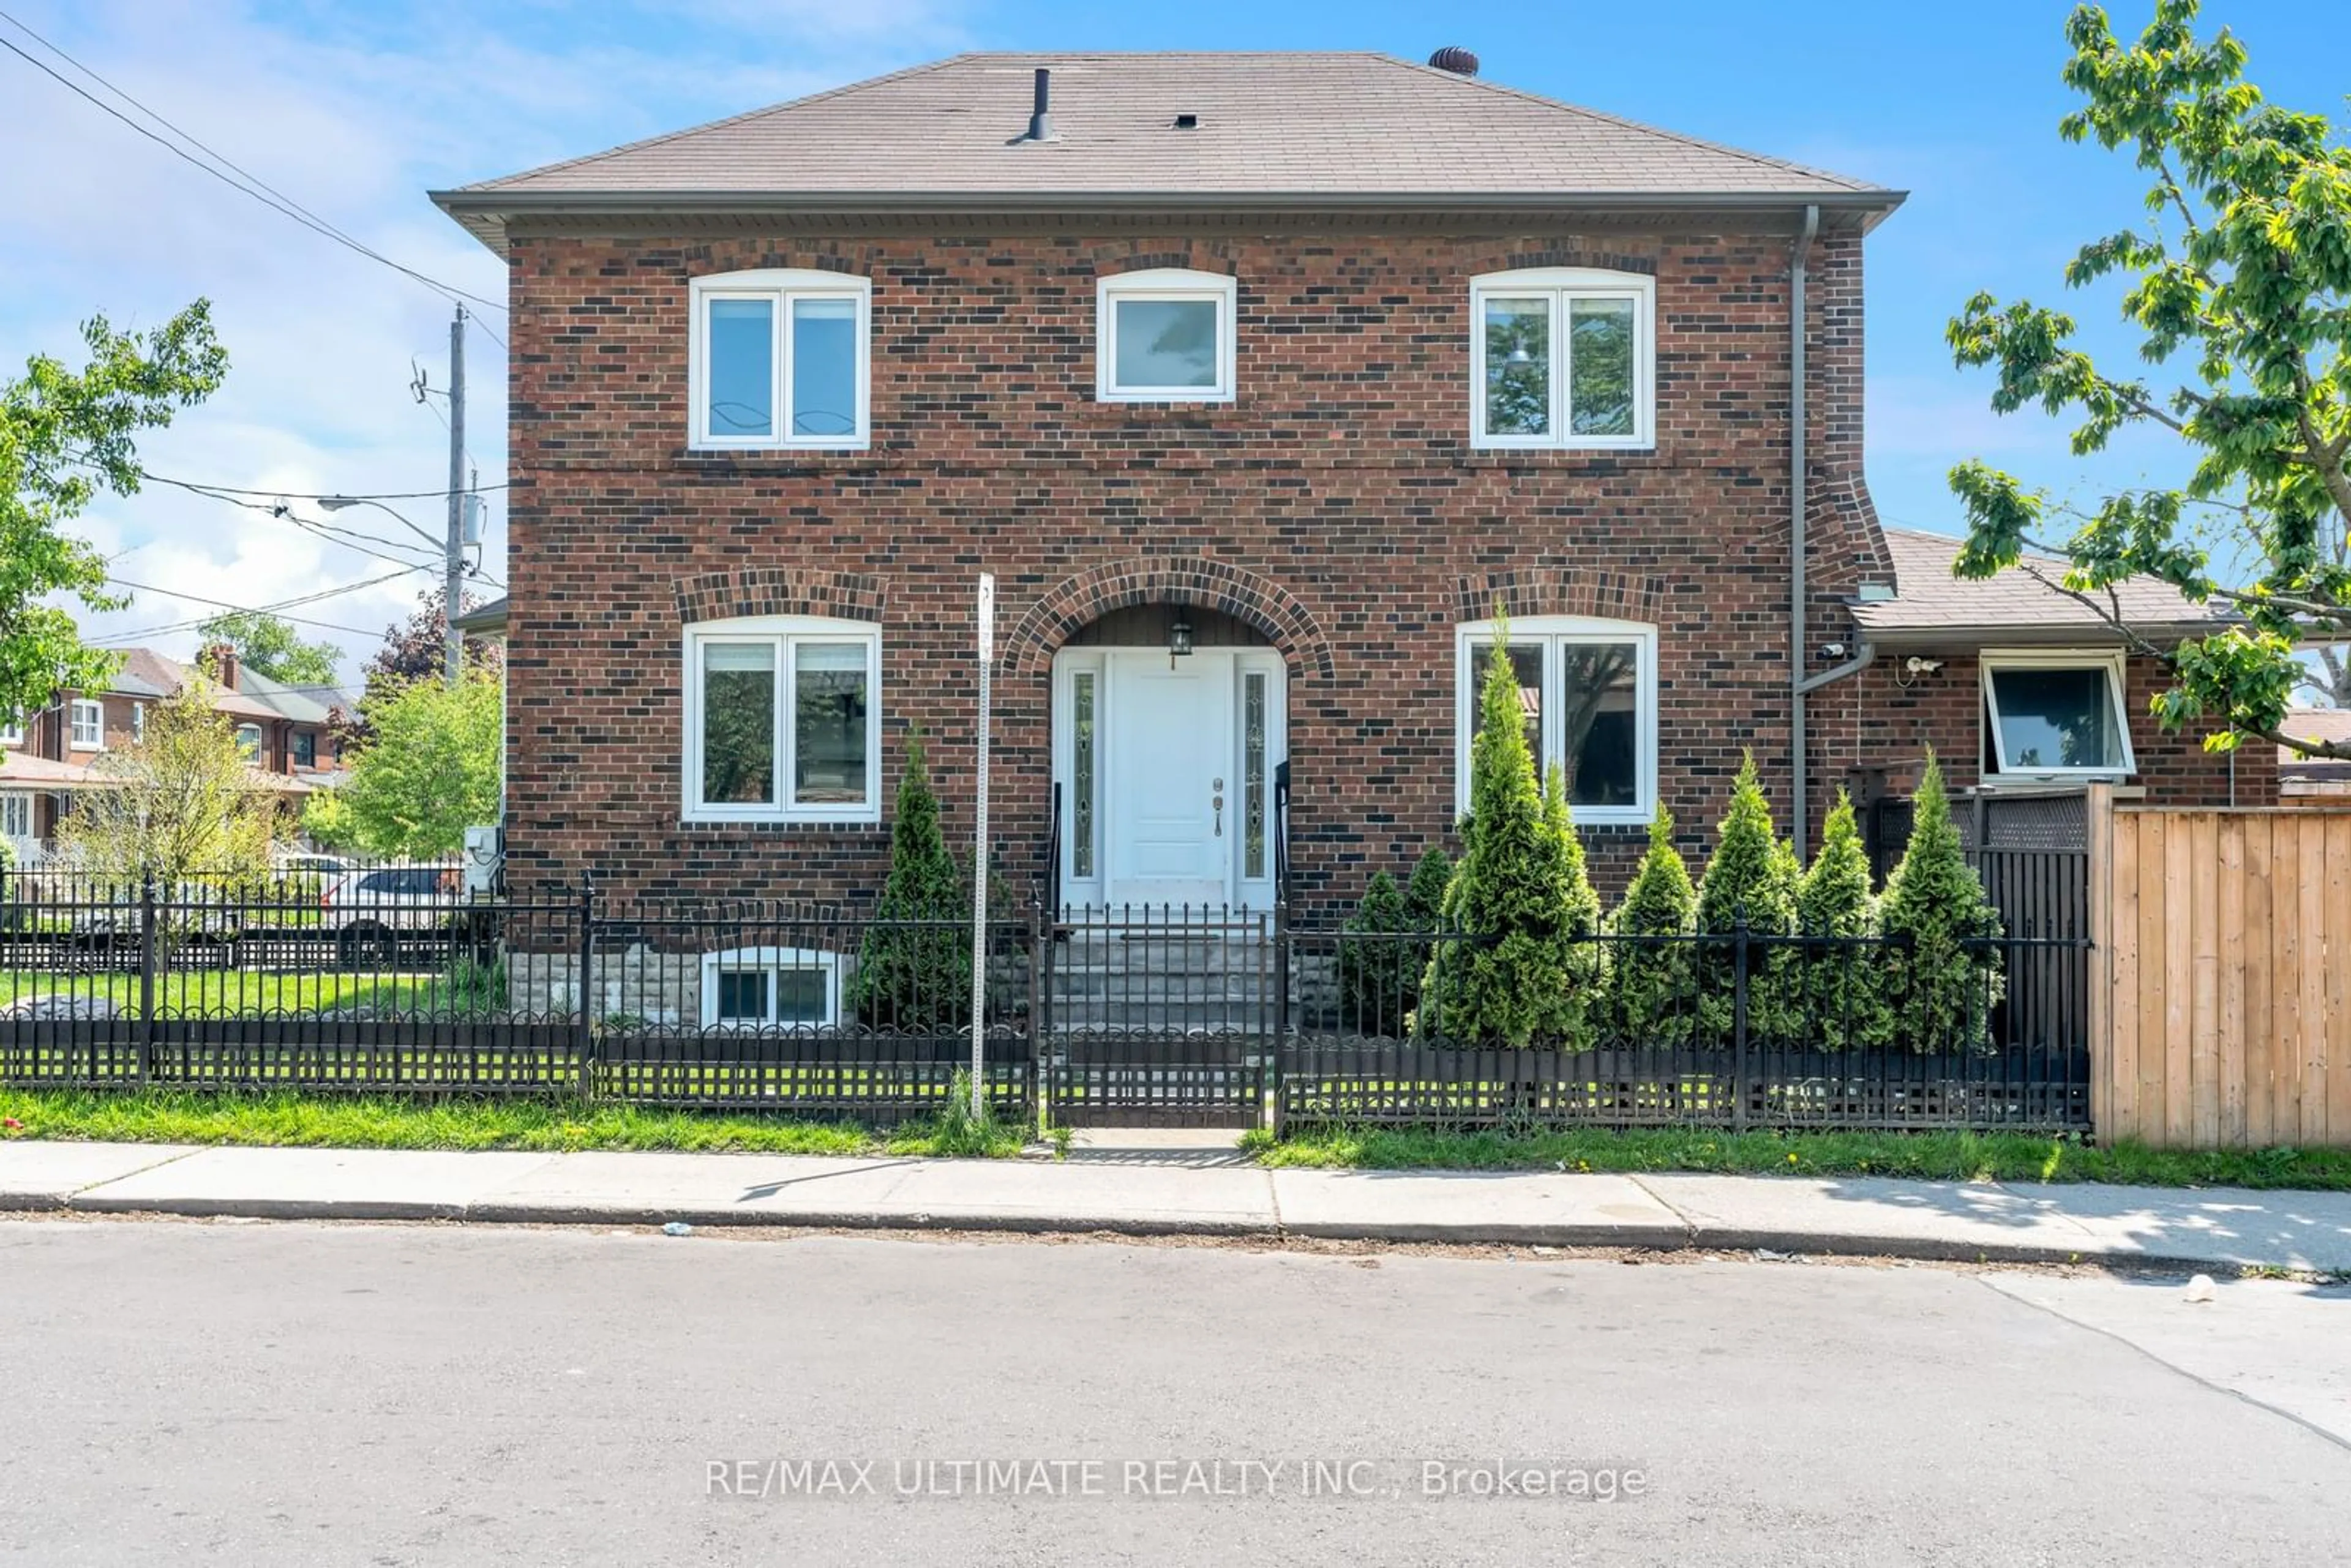 Home with brick exterior material for 290 Westmount Ave, Toronto Ontario M6E 3N1